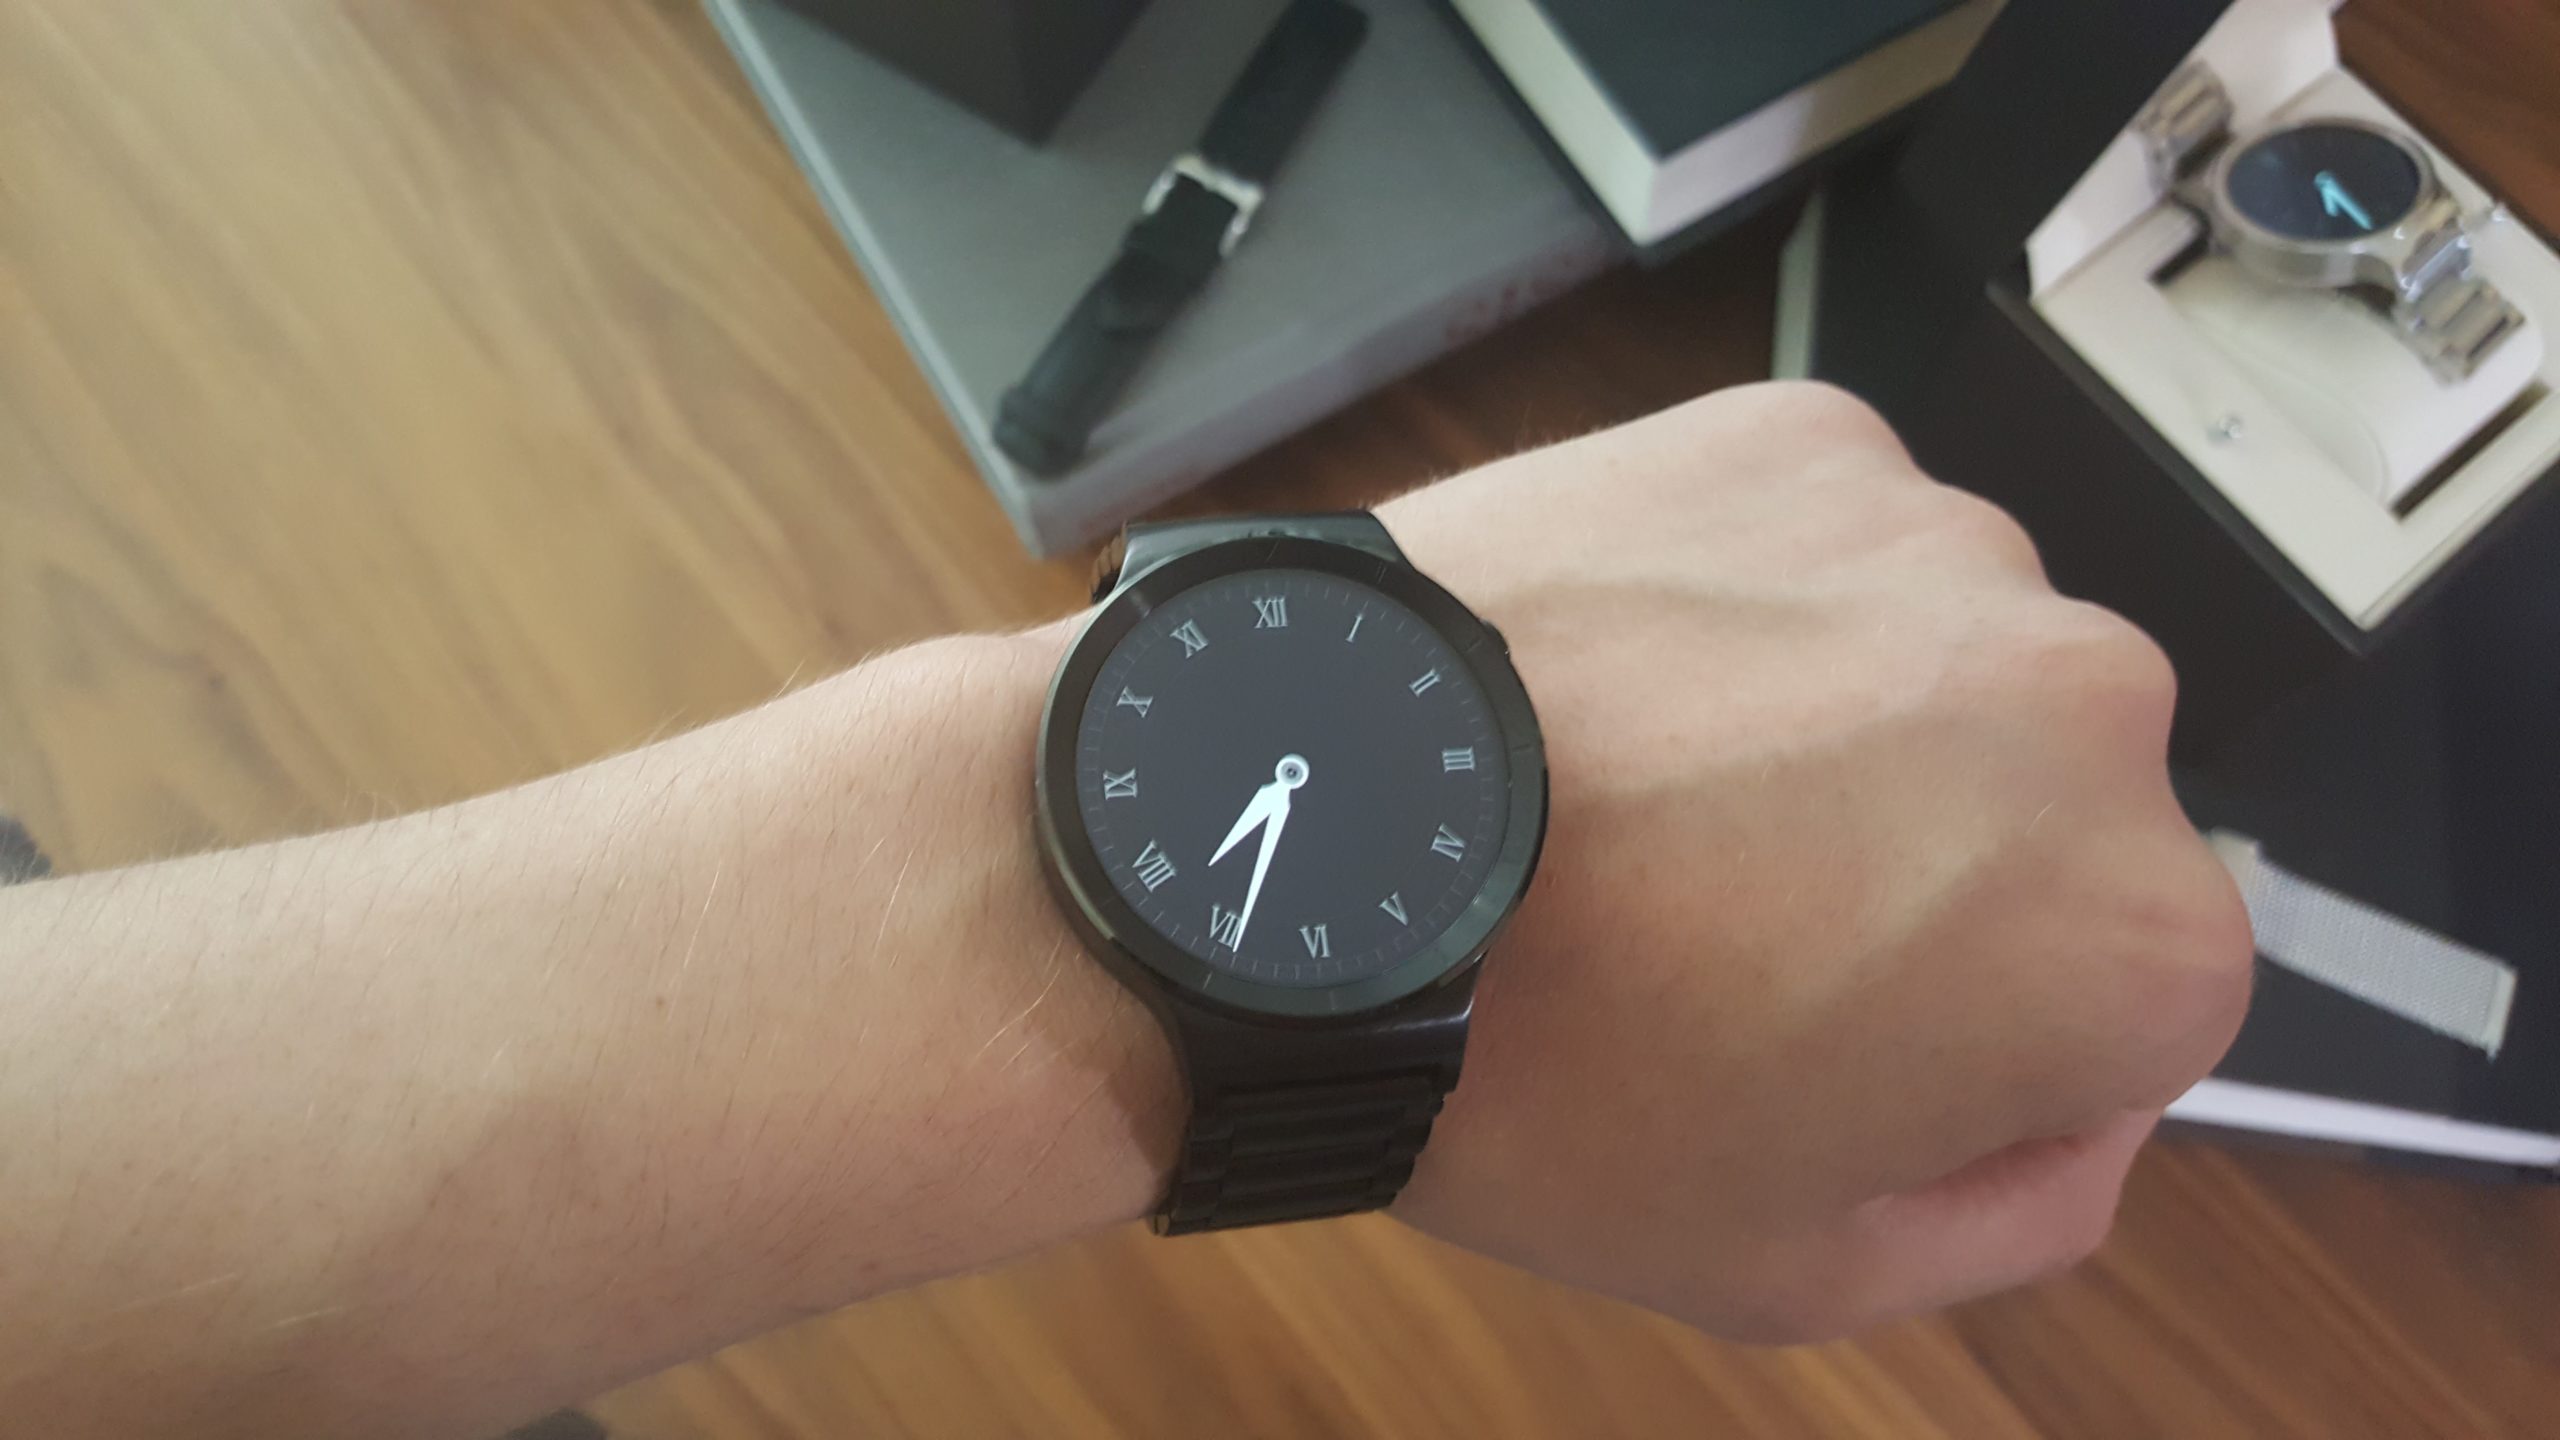 Huawei Watch Hands On: Gorgeous Luxury-Class That’s A Bit Too Bulky